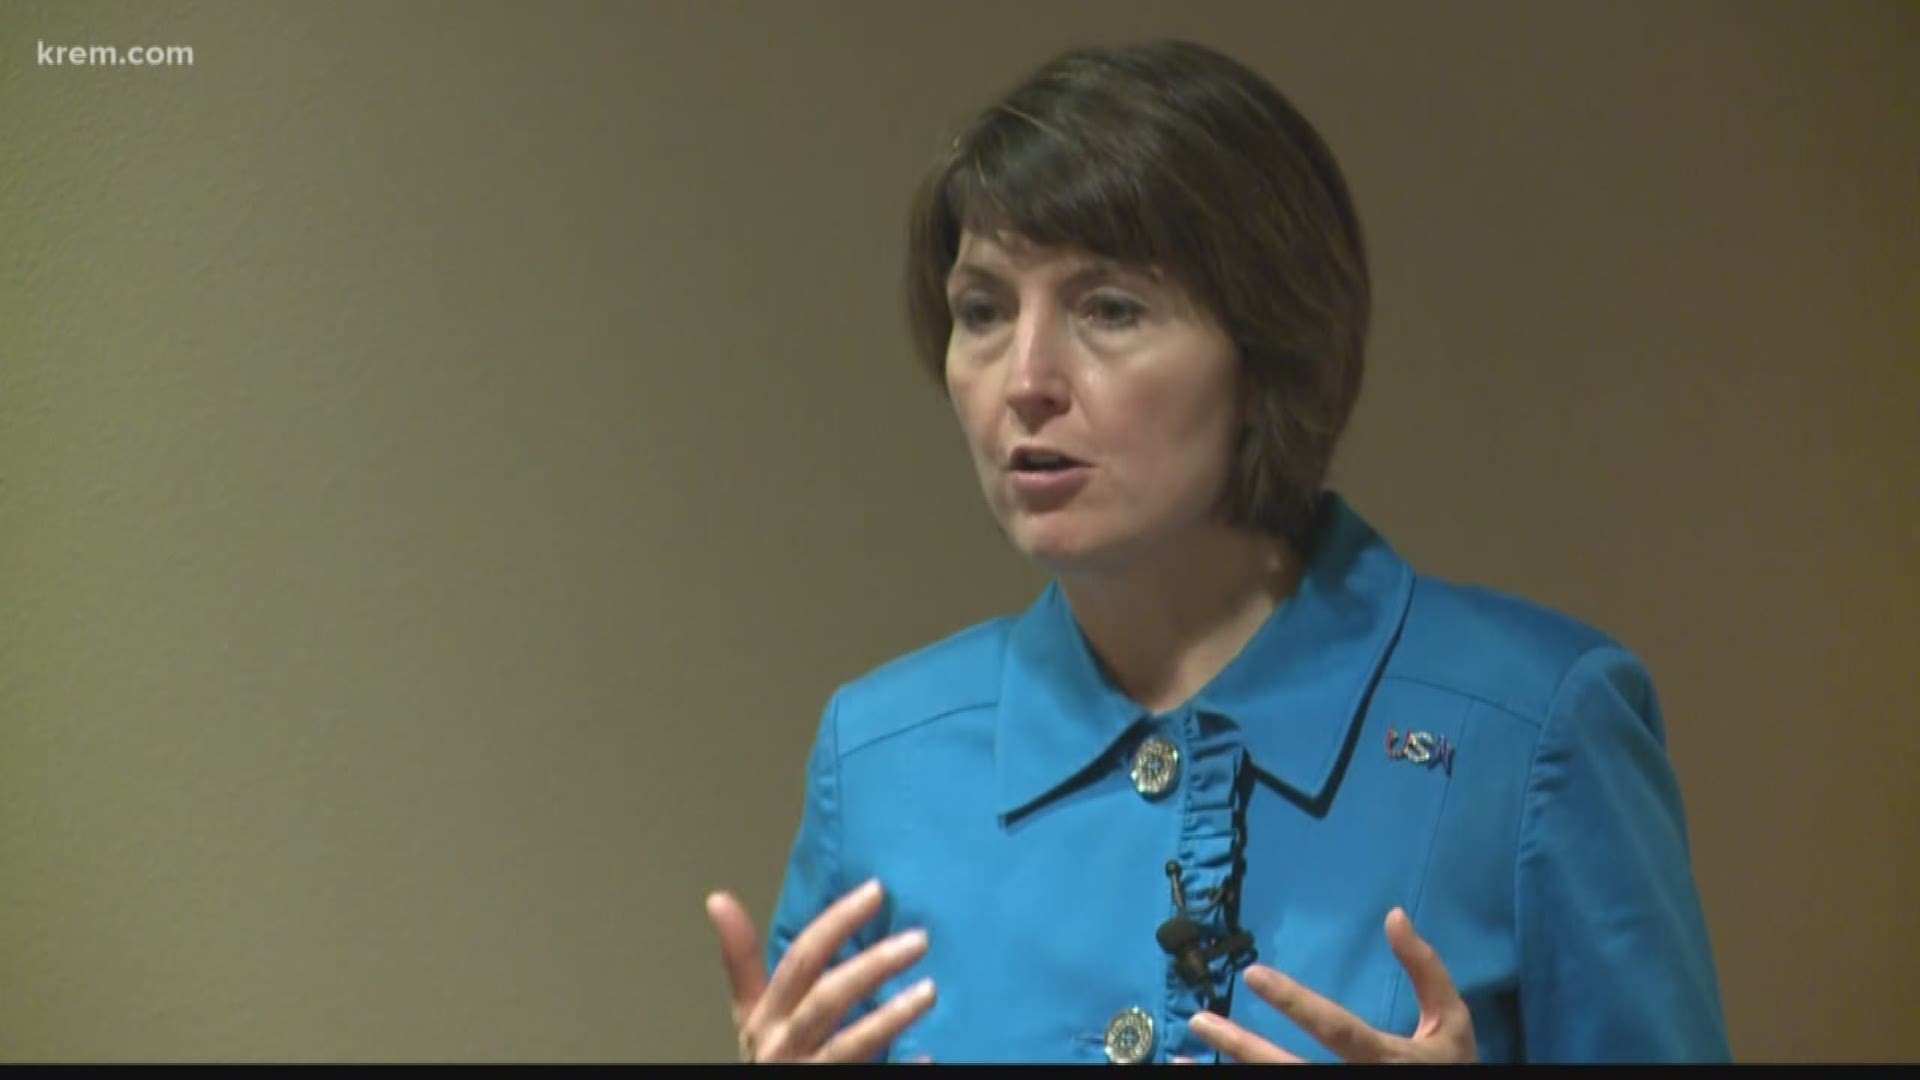 In the second half hour people started asking questions. KREM 2's Amanda Roley breaks down the answers from Congresswoman McMorris-Rodgers.